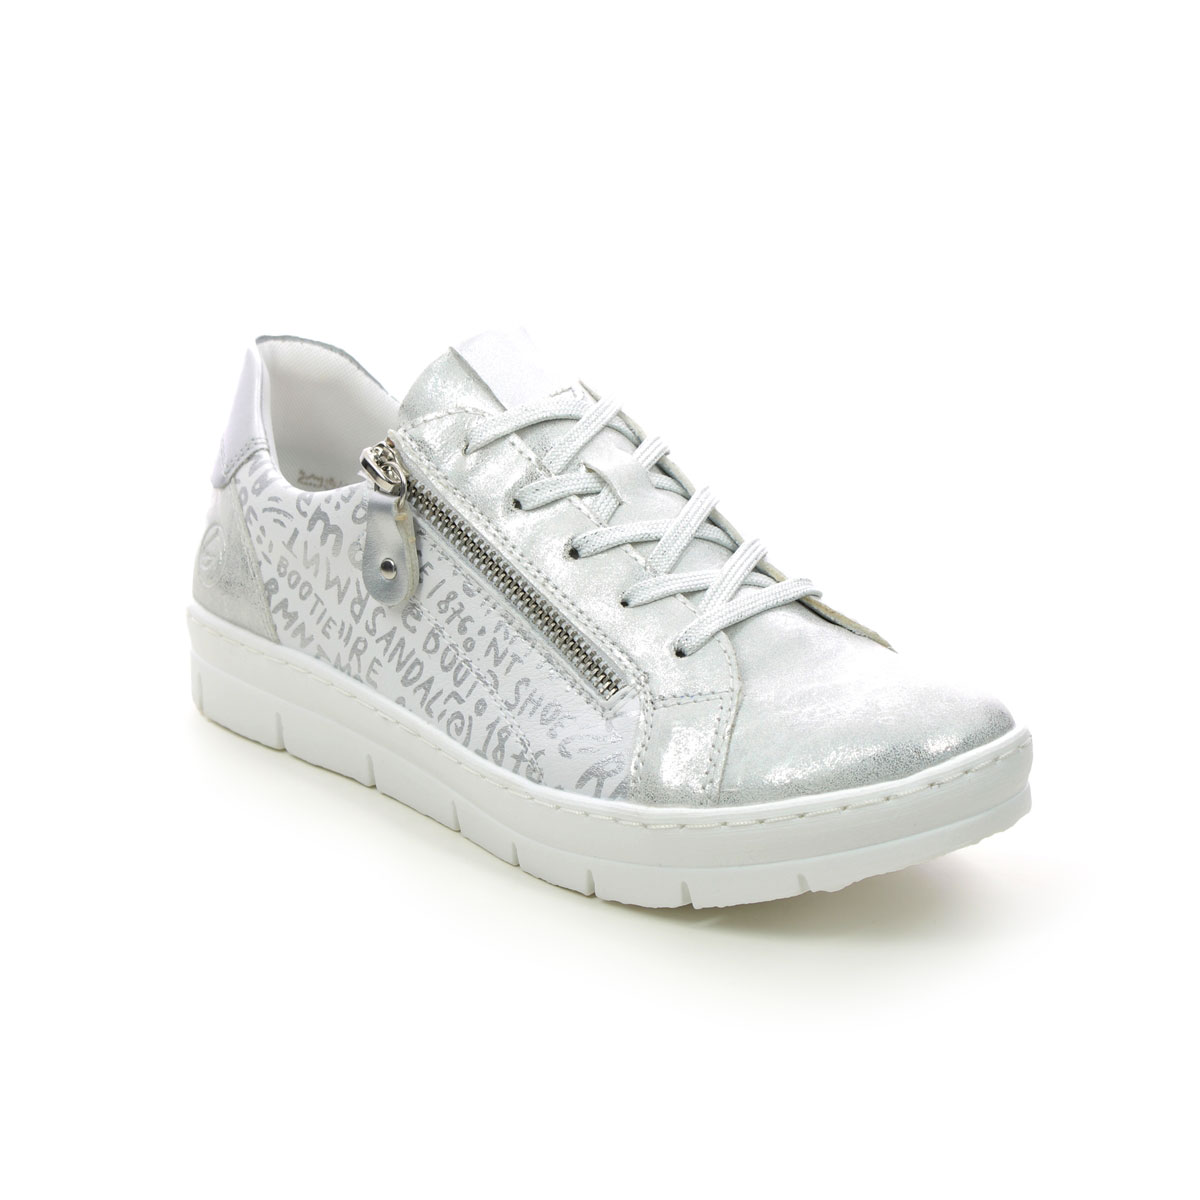 Remonte Ravenna 11 White Silver Womens Lacing Shoes D5821-80 In Size 40 In Plain White Silver